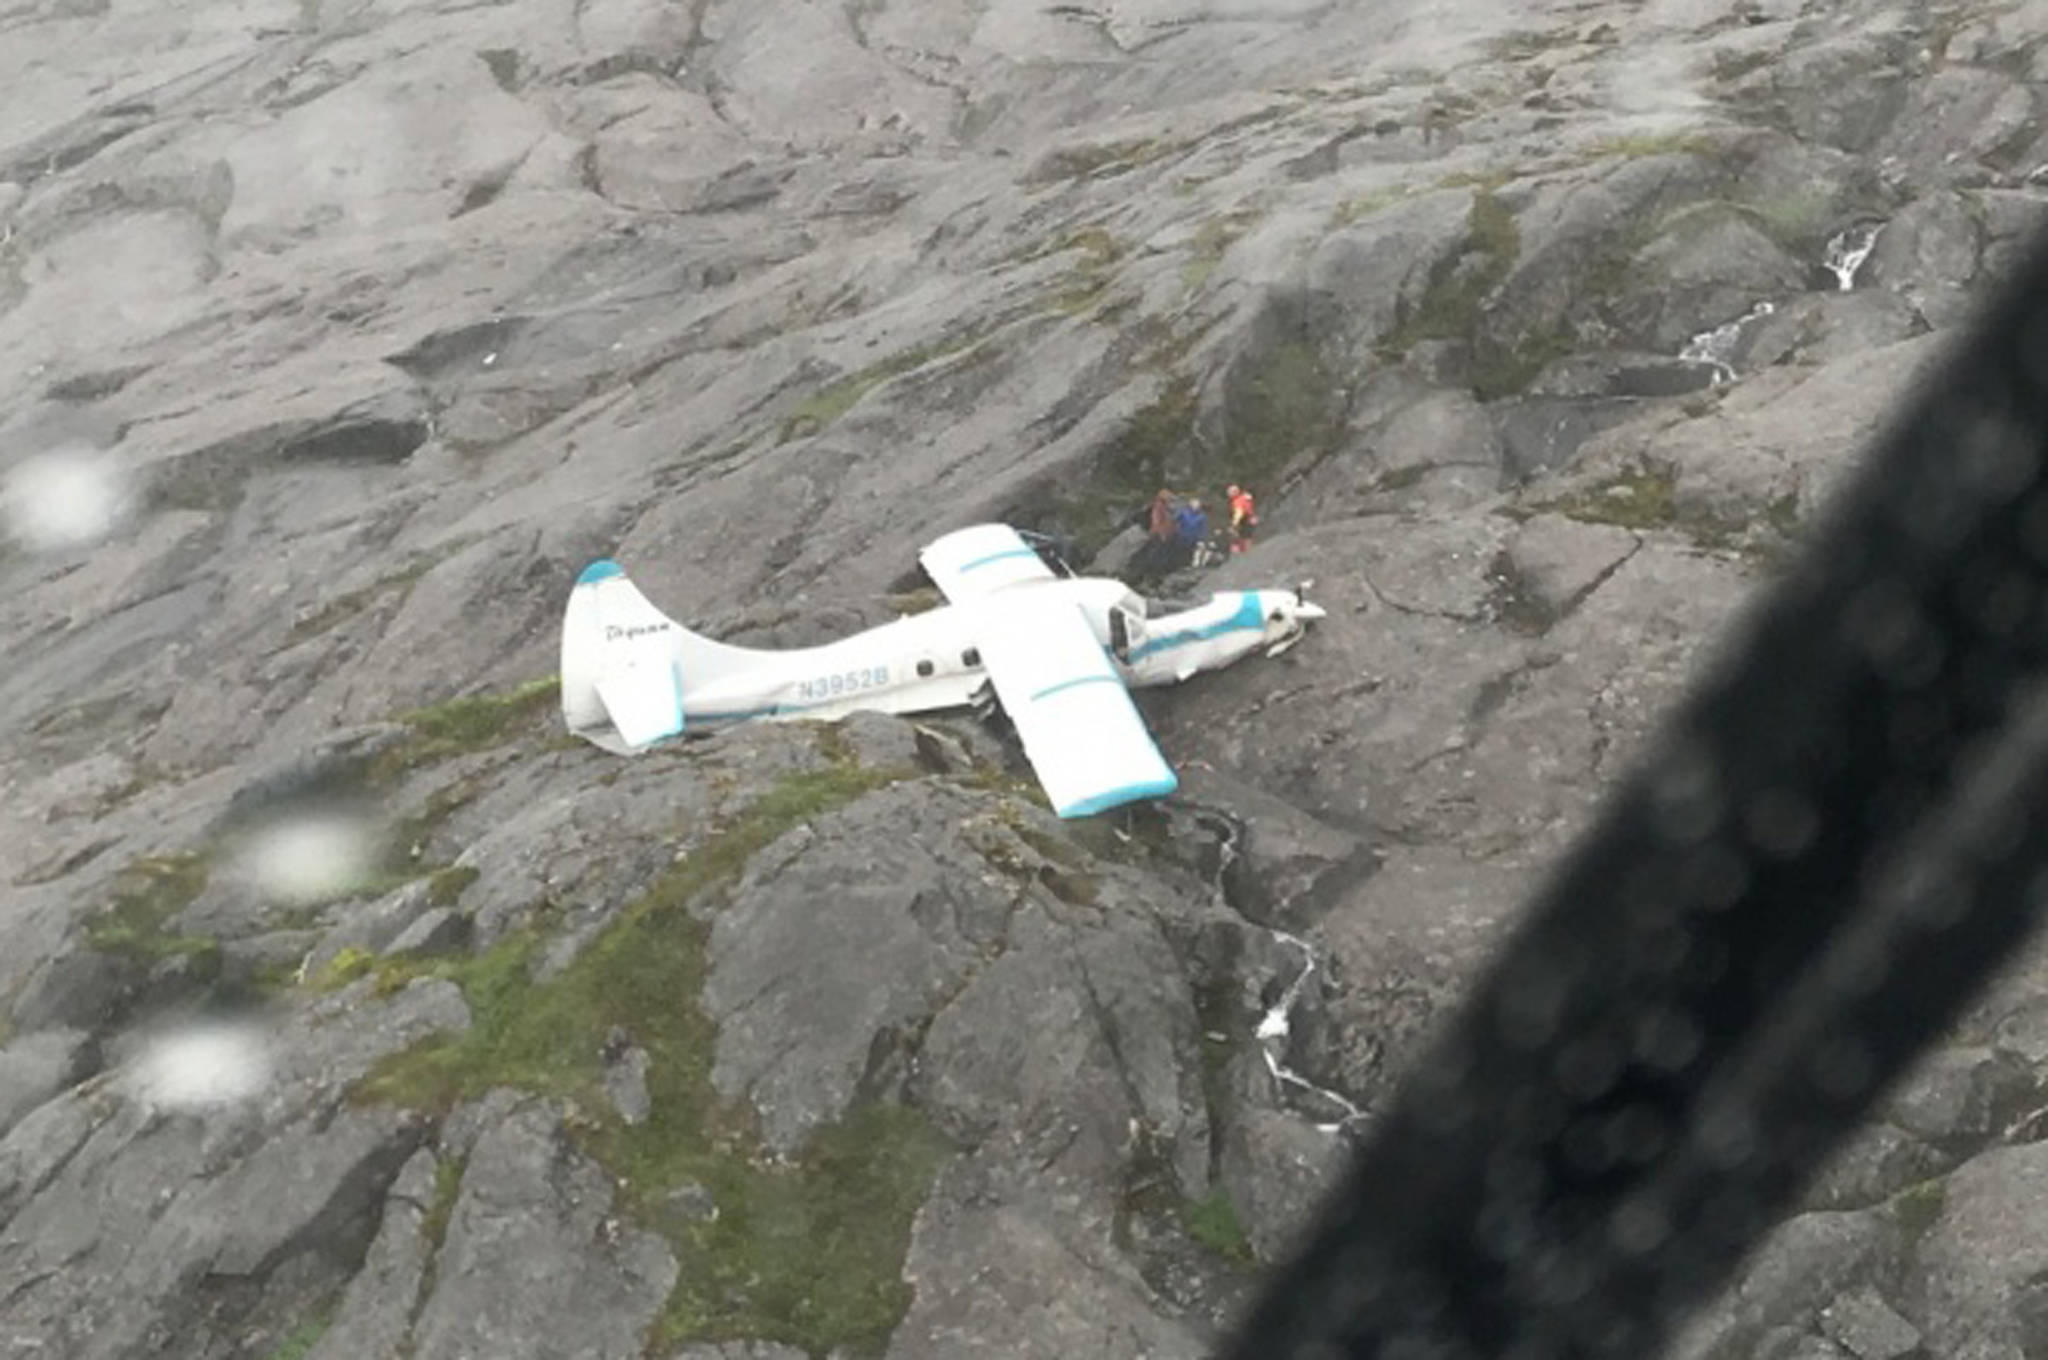 Two Coast Guard Air Station Sitka MH-60 Jayhawk helicopter crews rescue 11 people after a float plane crashed 39 miles south southwest of Ketchikan, Alaska, on Prince of Wales Island, July 10, 2018. All 11 people were taken to a staging area nearby for further transfer to Ketchikan. (U.S. Coast Guard | Courtesy Photo)